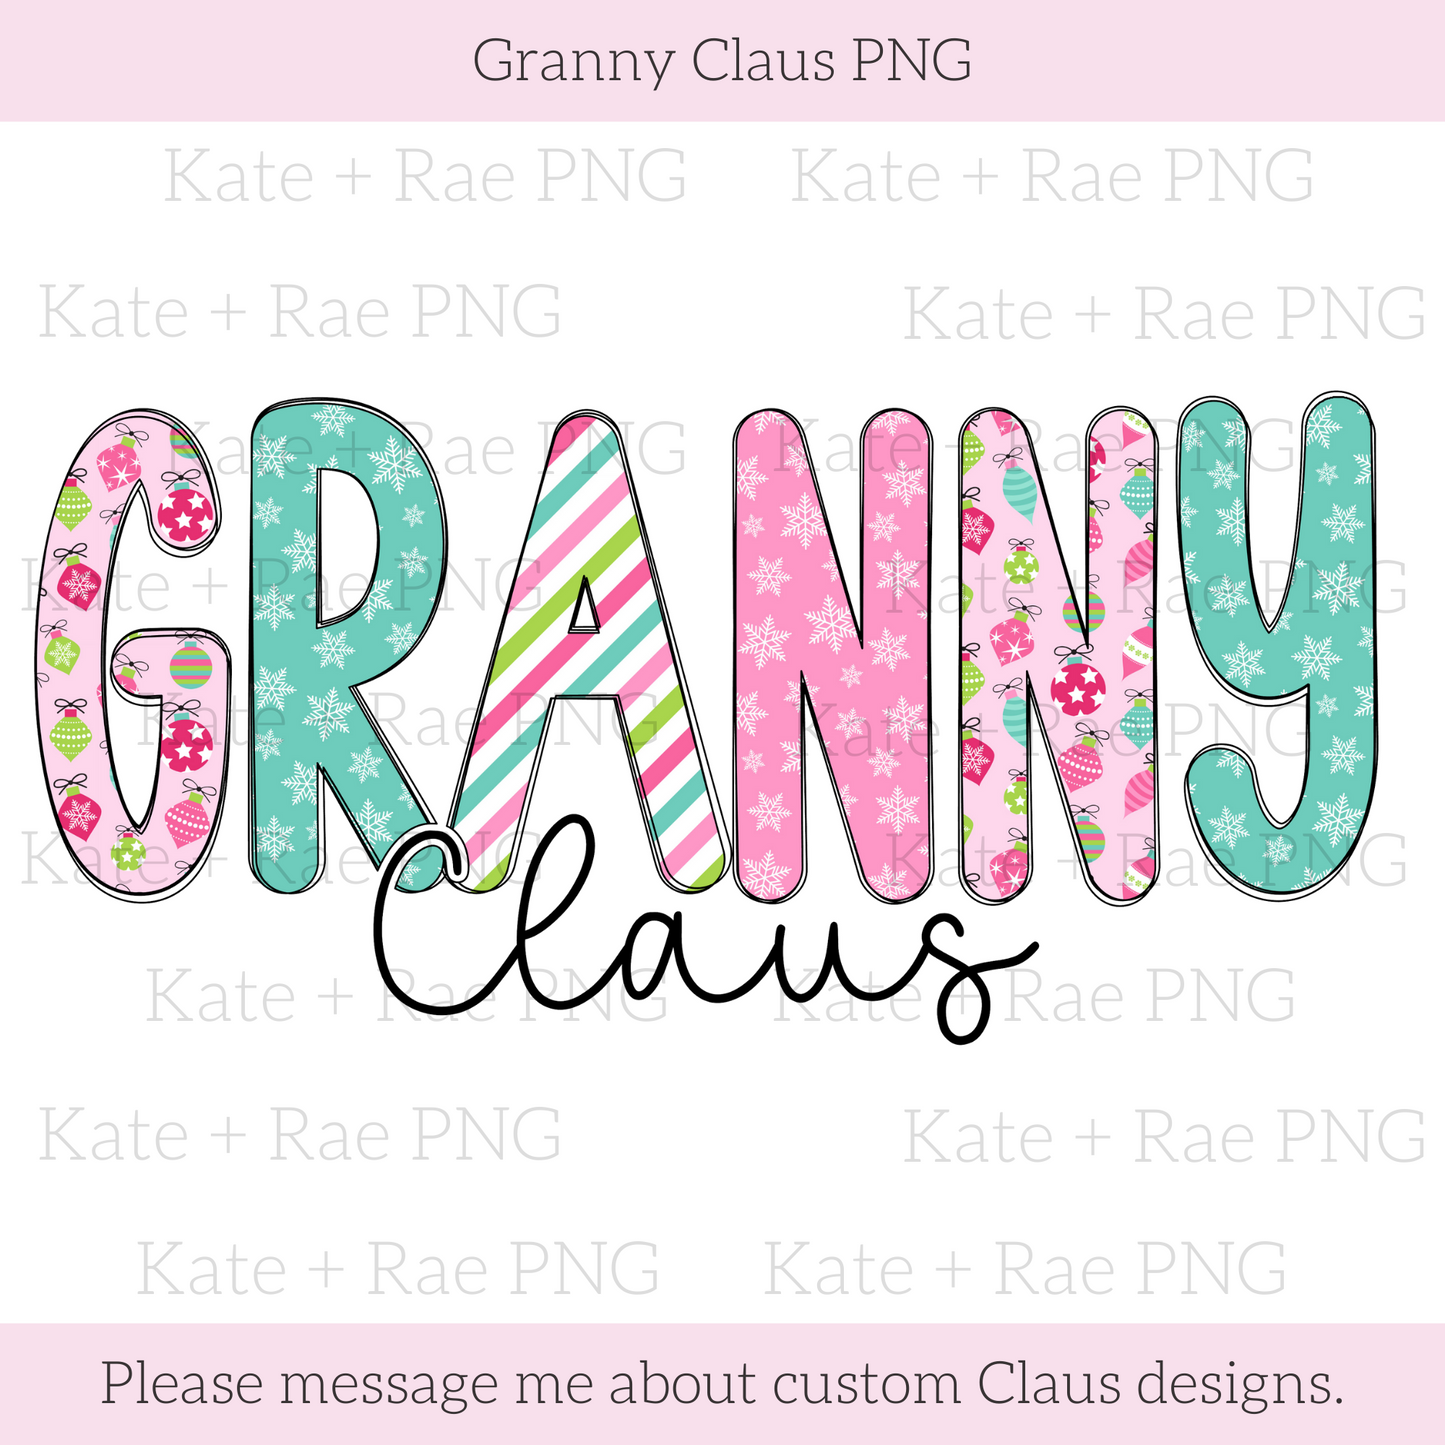 Granny Claus PNG